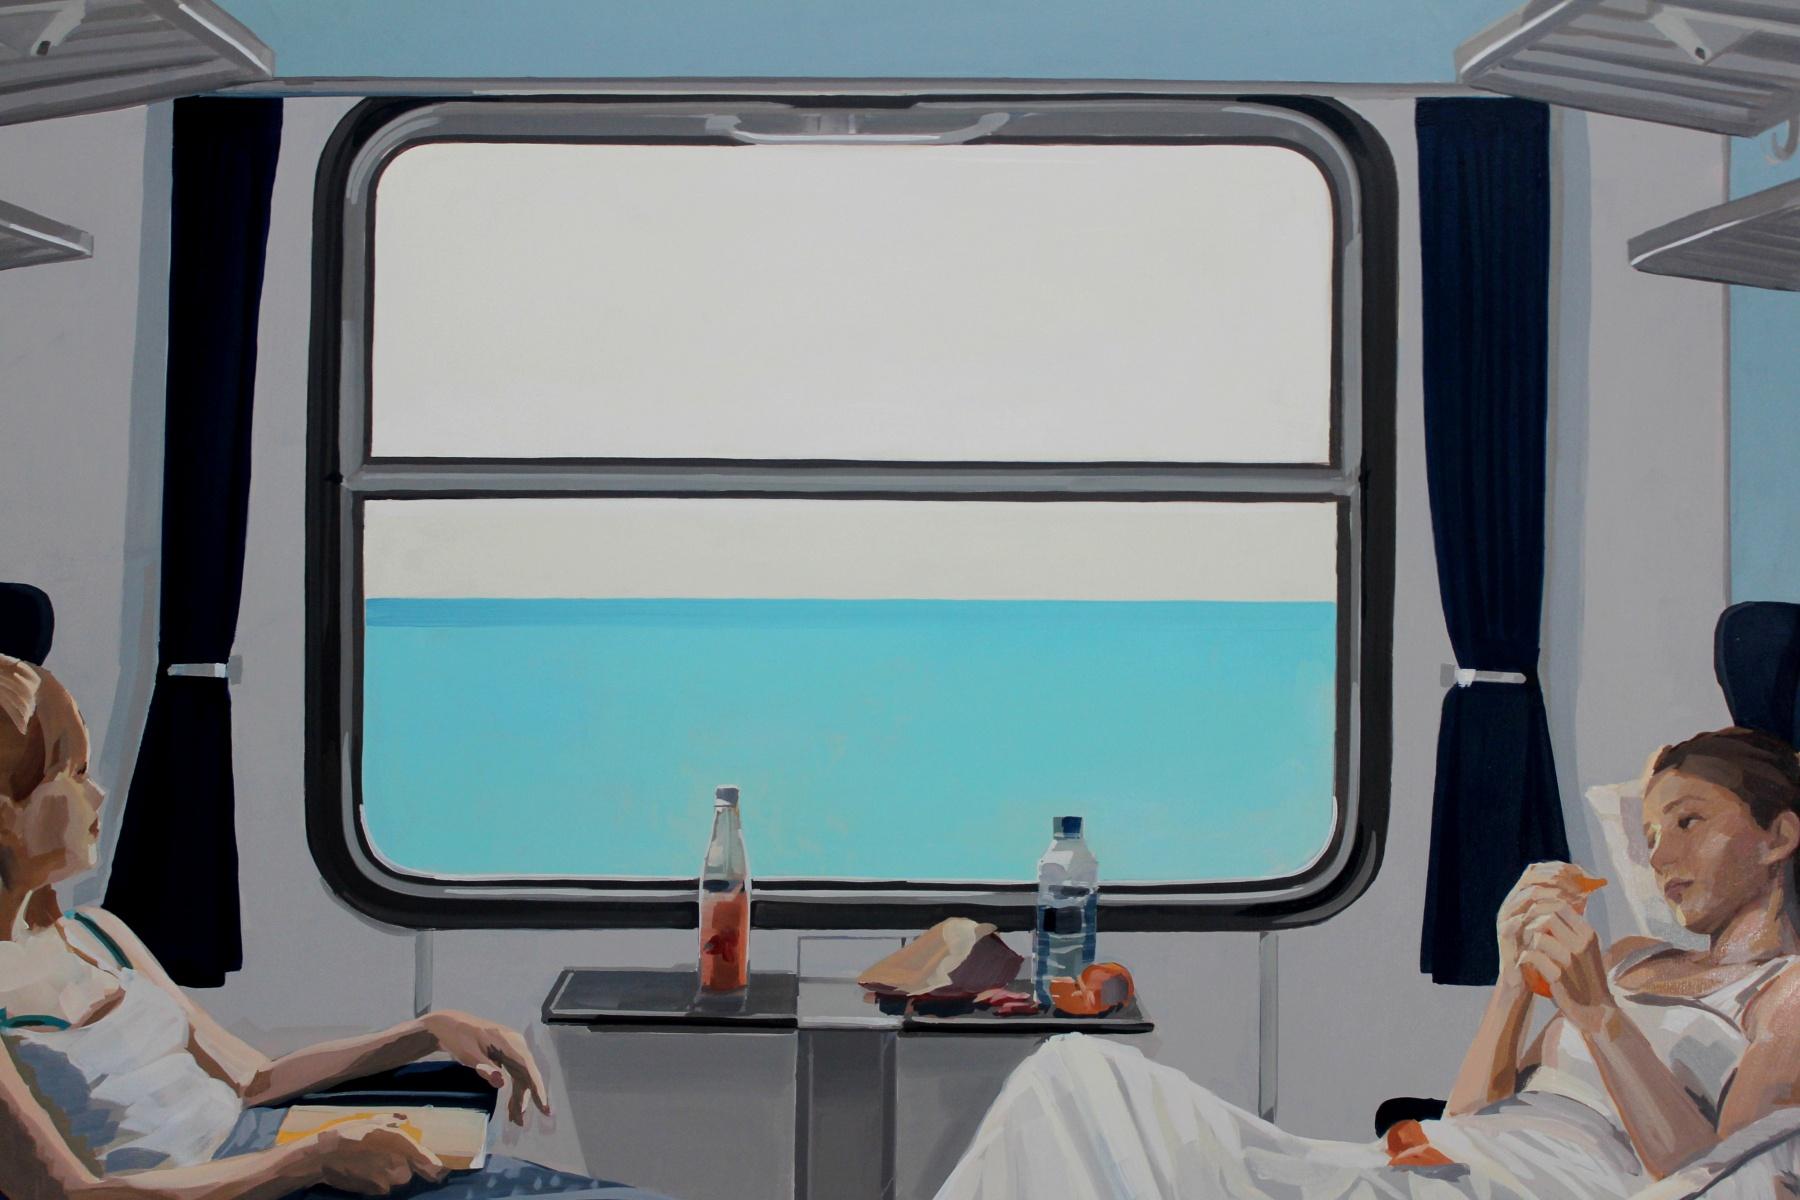 Oil painting depicting two women in a train by the sea, painted by Marek Okrassa, who was twice awarded with a grant from the Ministry of Culture and Arts and in 1999, the Silver Spur in 2000, the honourable mention of Franciszka Eibisch Foundation